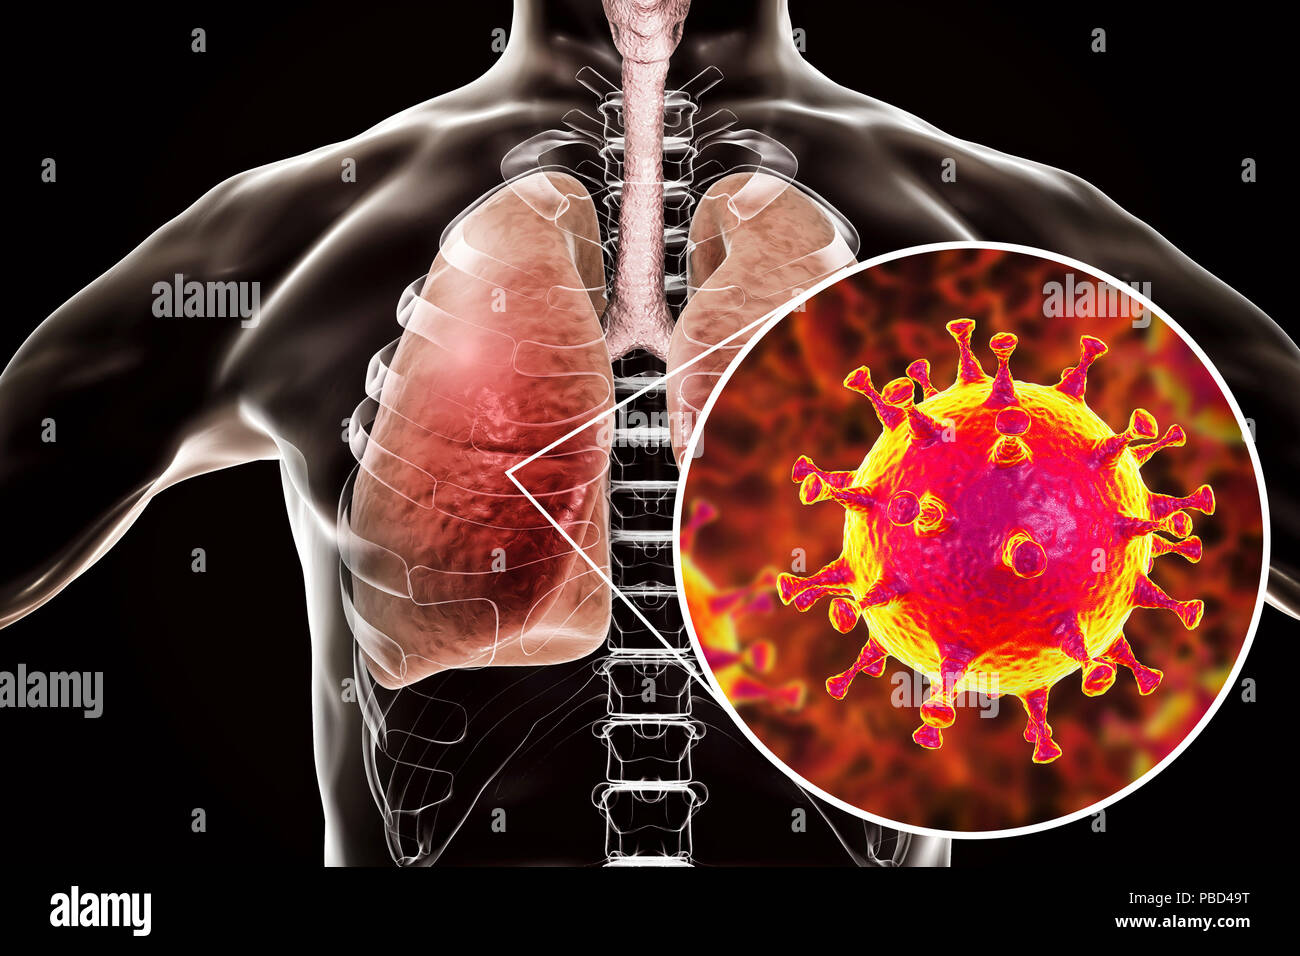 MERS virus infection of lungs, conceptual illustration. MERS (Middle East respiratory syndrome) is a viral respiratory illness caused by the MERS-associated coronavirus (MERS-CoV). Formerly known as novel coronavirus, MERS was first identified in Saudi Arabia in 2012. Most people infected with MERS develop severe acute respiratory illness with symptoms of fever, cough, and shortness of breath. Stock Photo